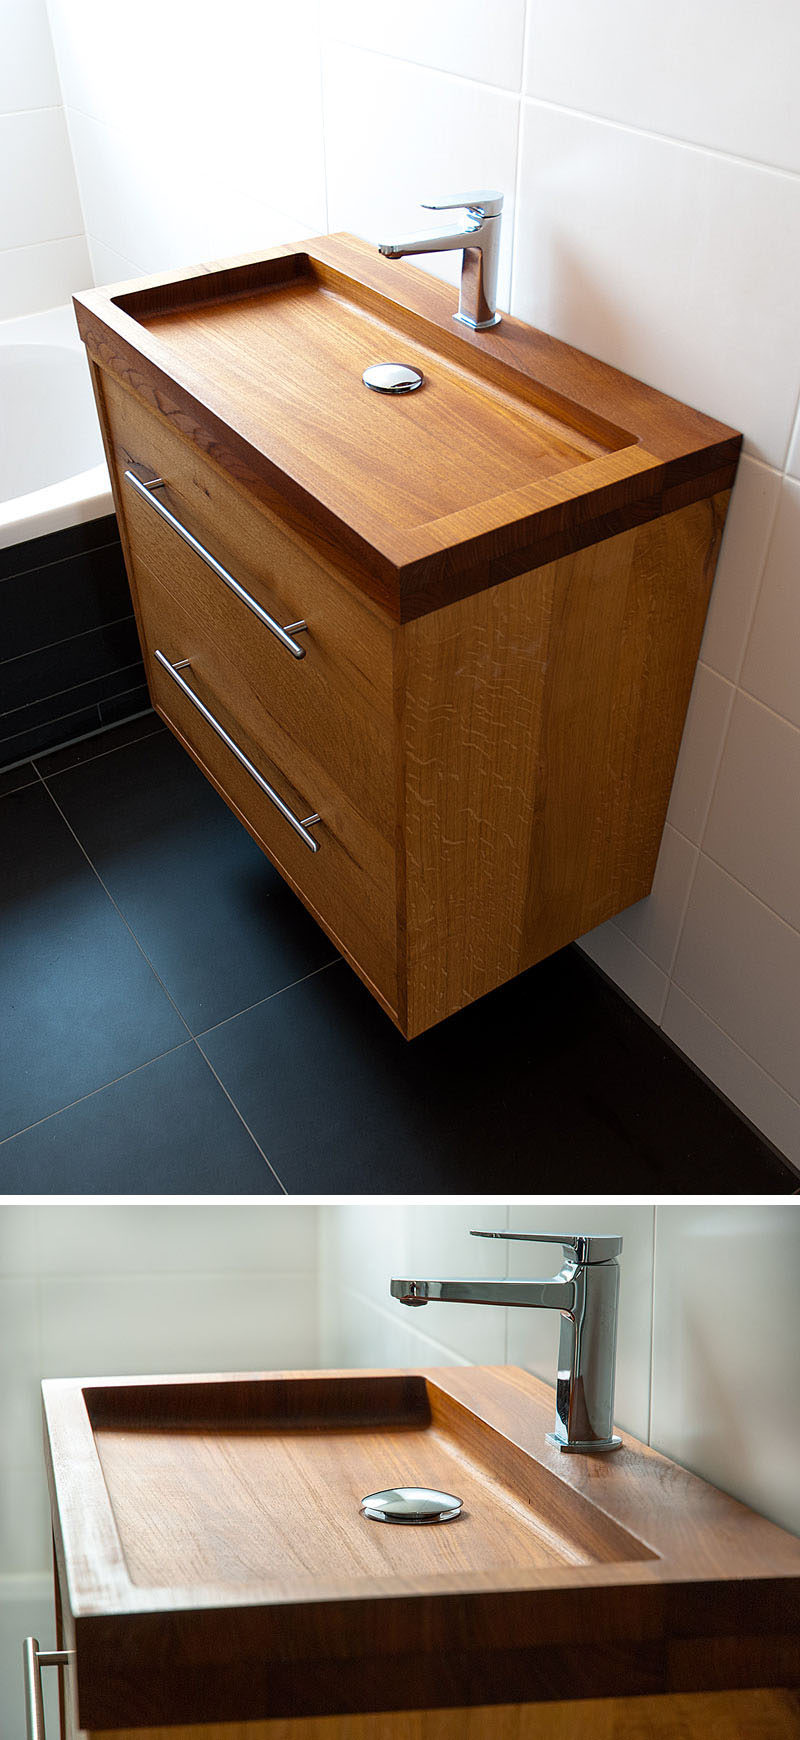 Bathroom Design Idea - Install Wood Sinks For A Natural Touch